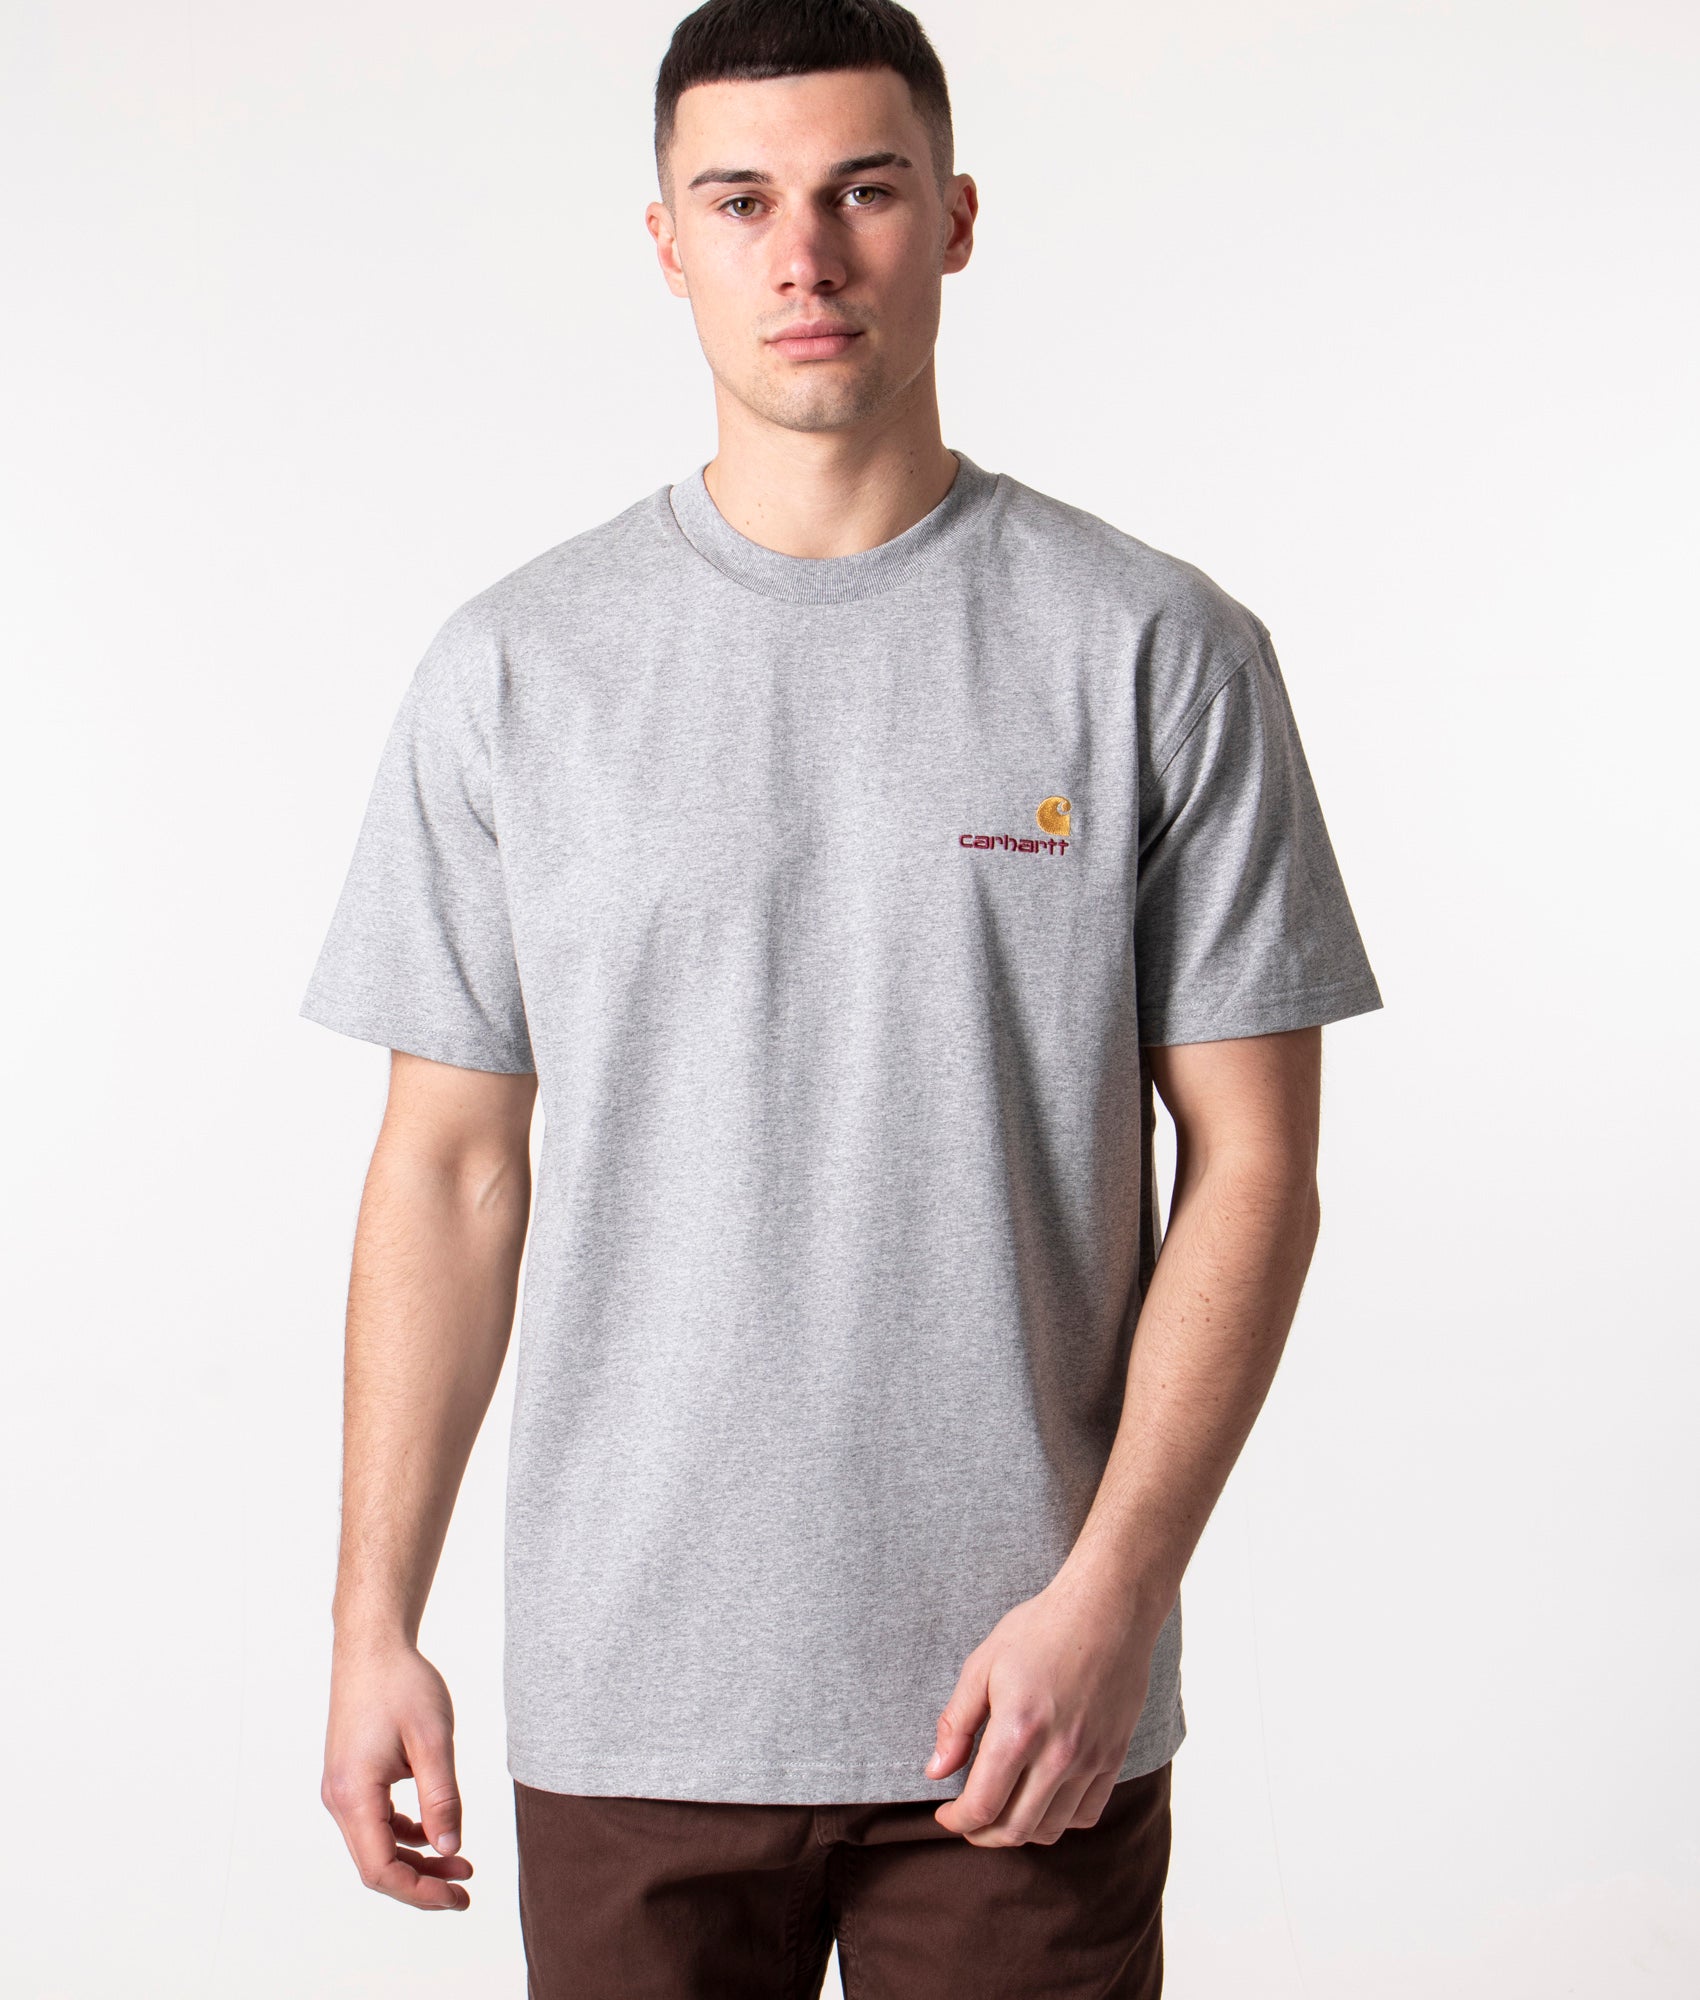 Carhartt WIP Mens Relaxed Fit American Script T-Shirt - Colour: V6XX Grey Heather - Size: Large